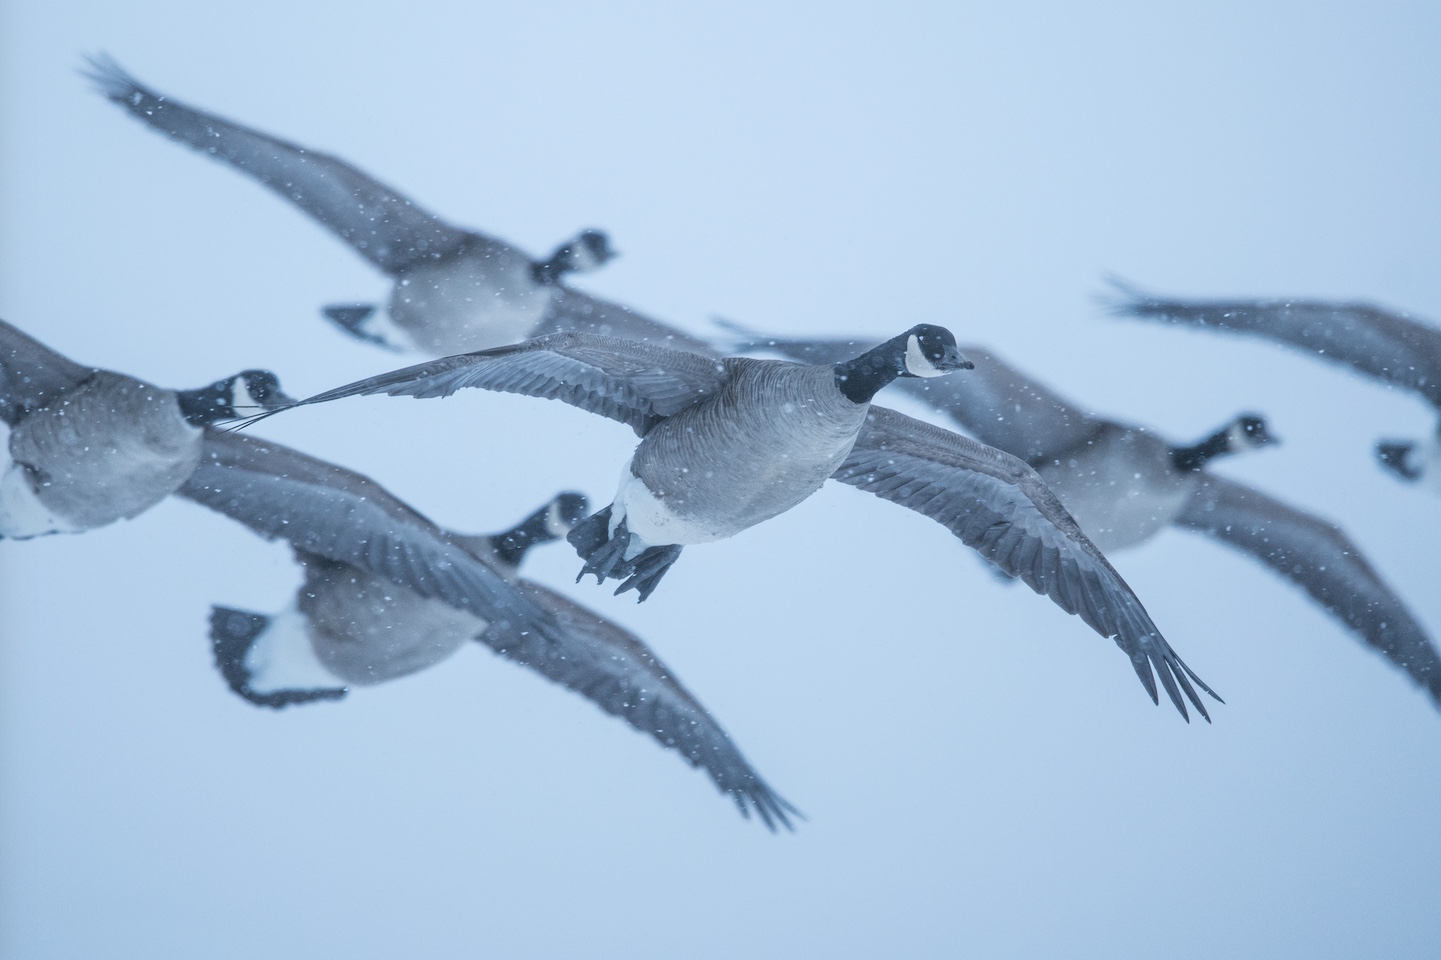 Canada geese flying in the snow.